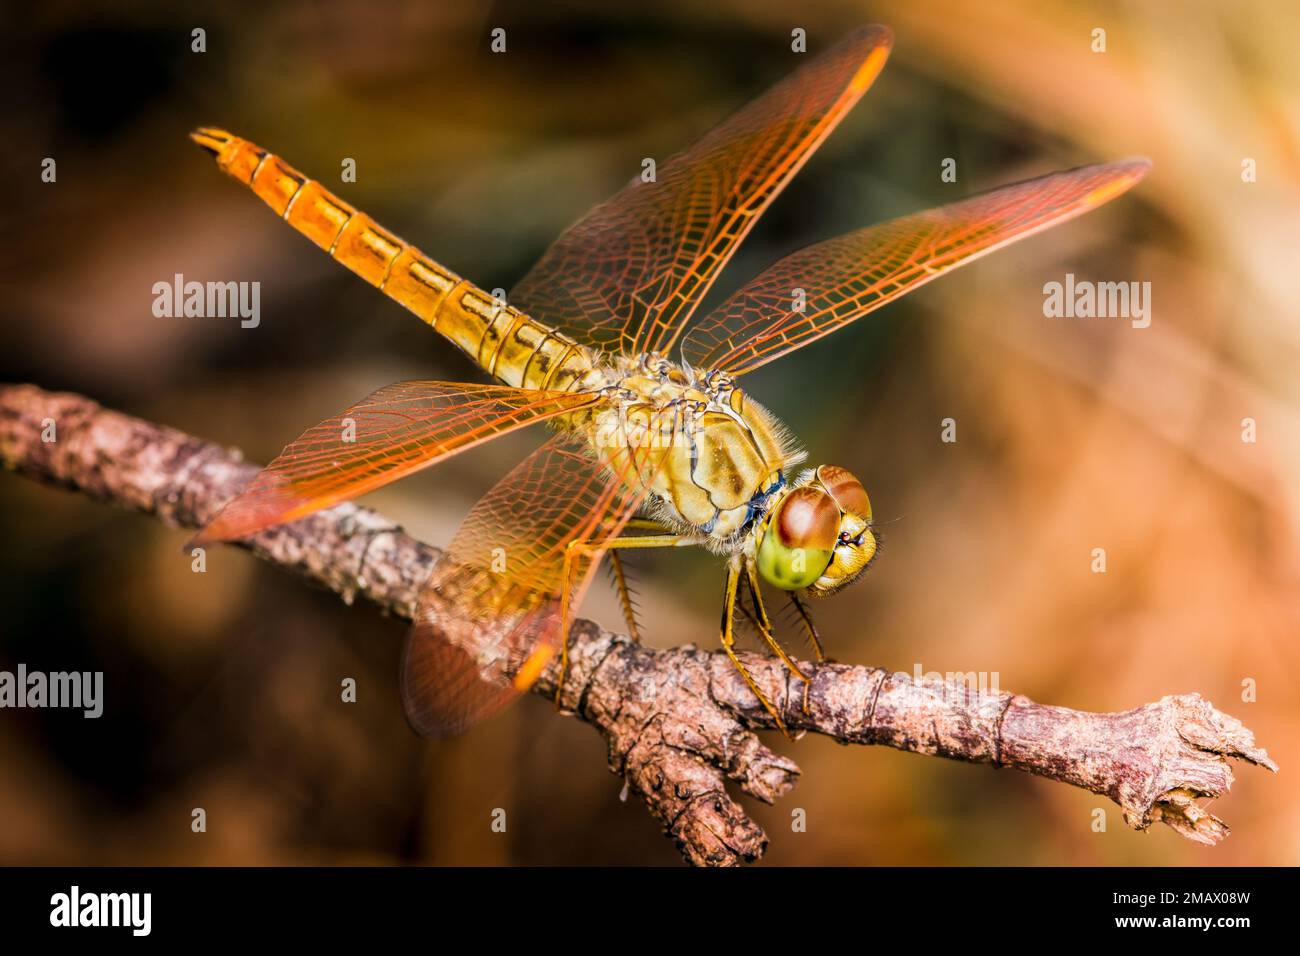 Close up of Dragonfly perched on a tree branch, dry wood and nature background, Selective focus, insect macro, Colorful insect in Thailand. Stock Photo